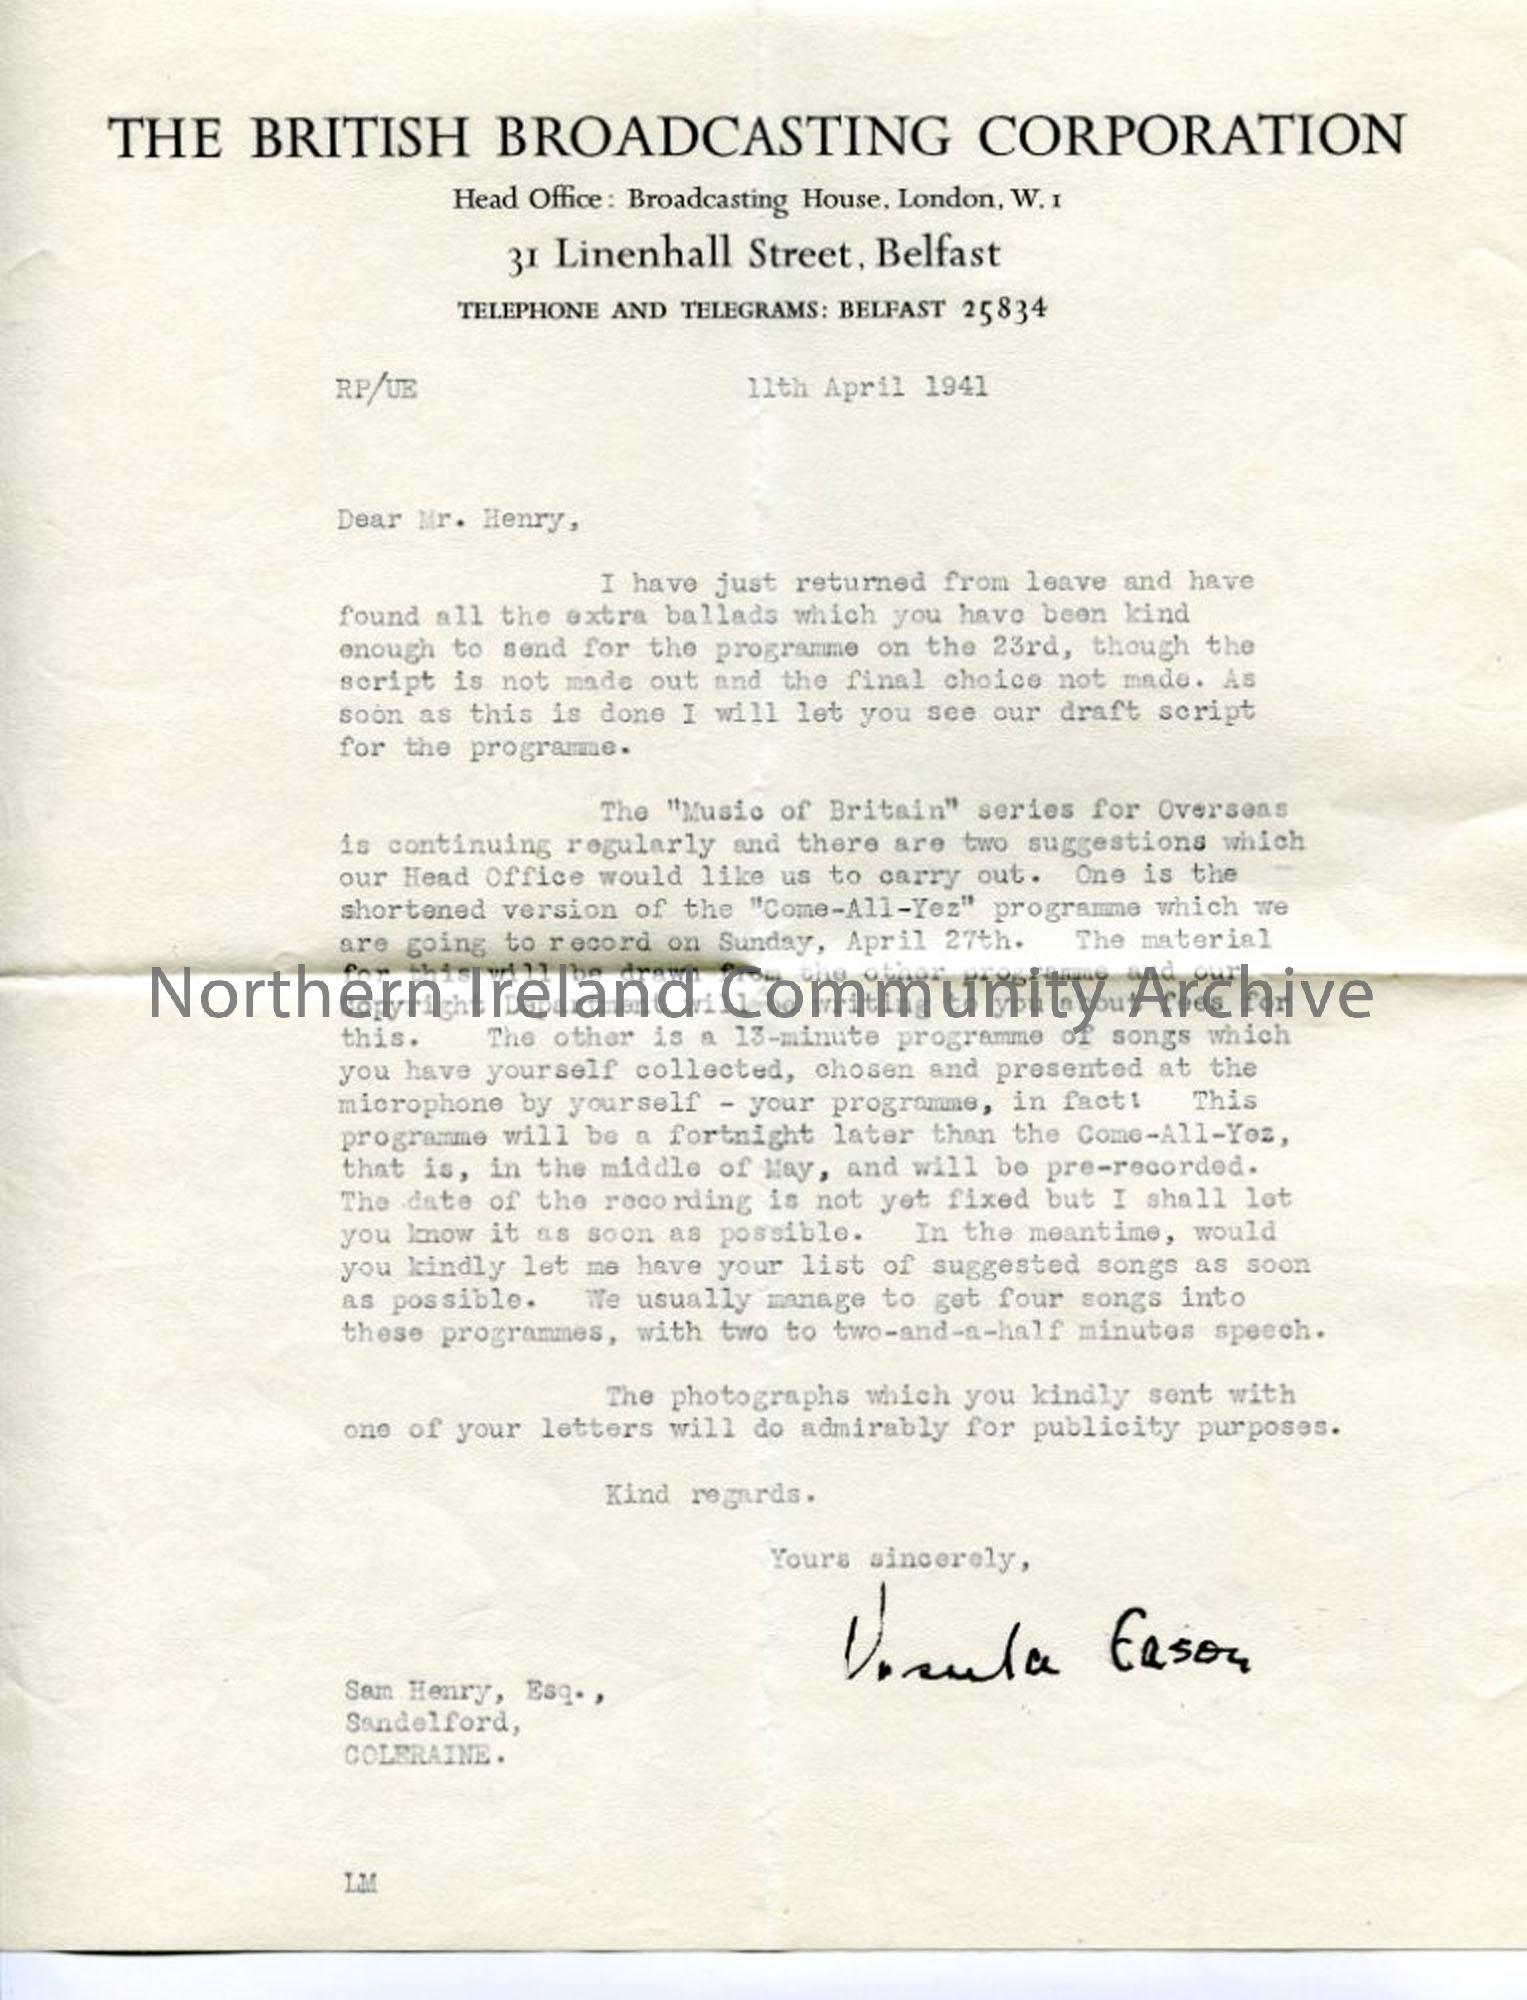 Letter from Ursula Eason of the BBC, dated 11.4.1941